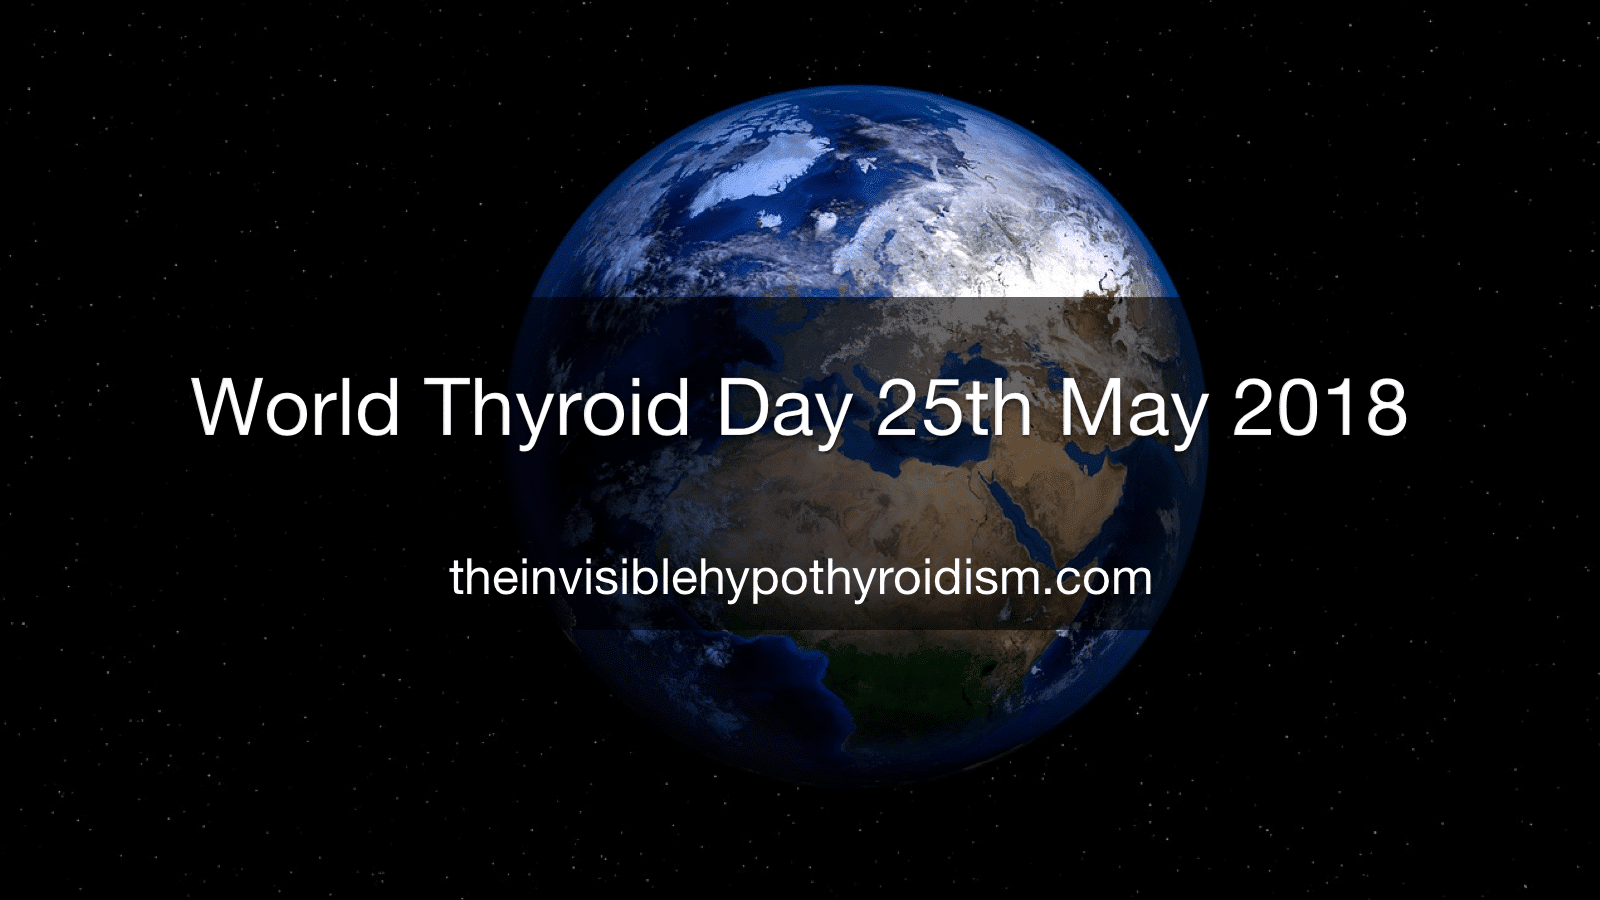 World Thyroid Day - 25th May 2018